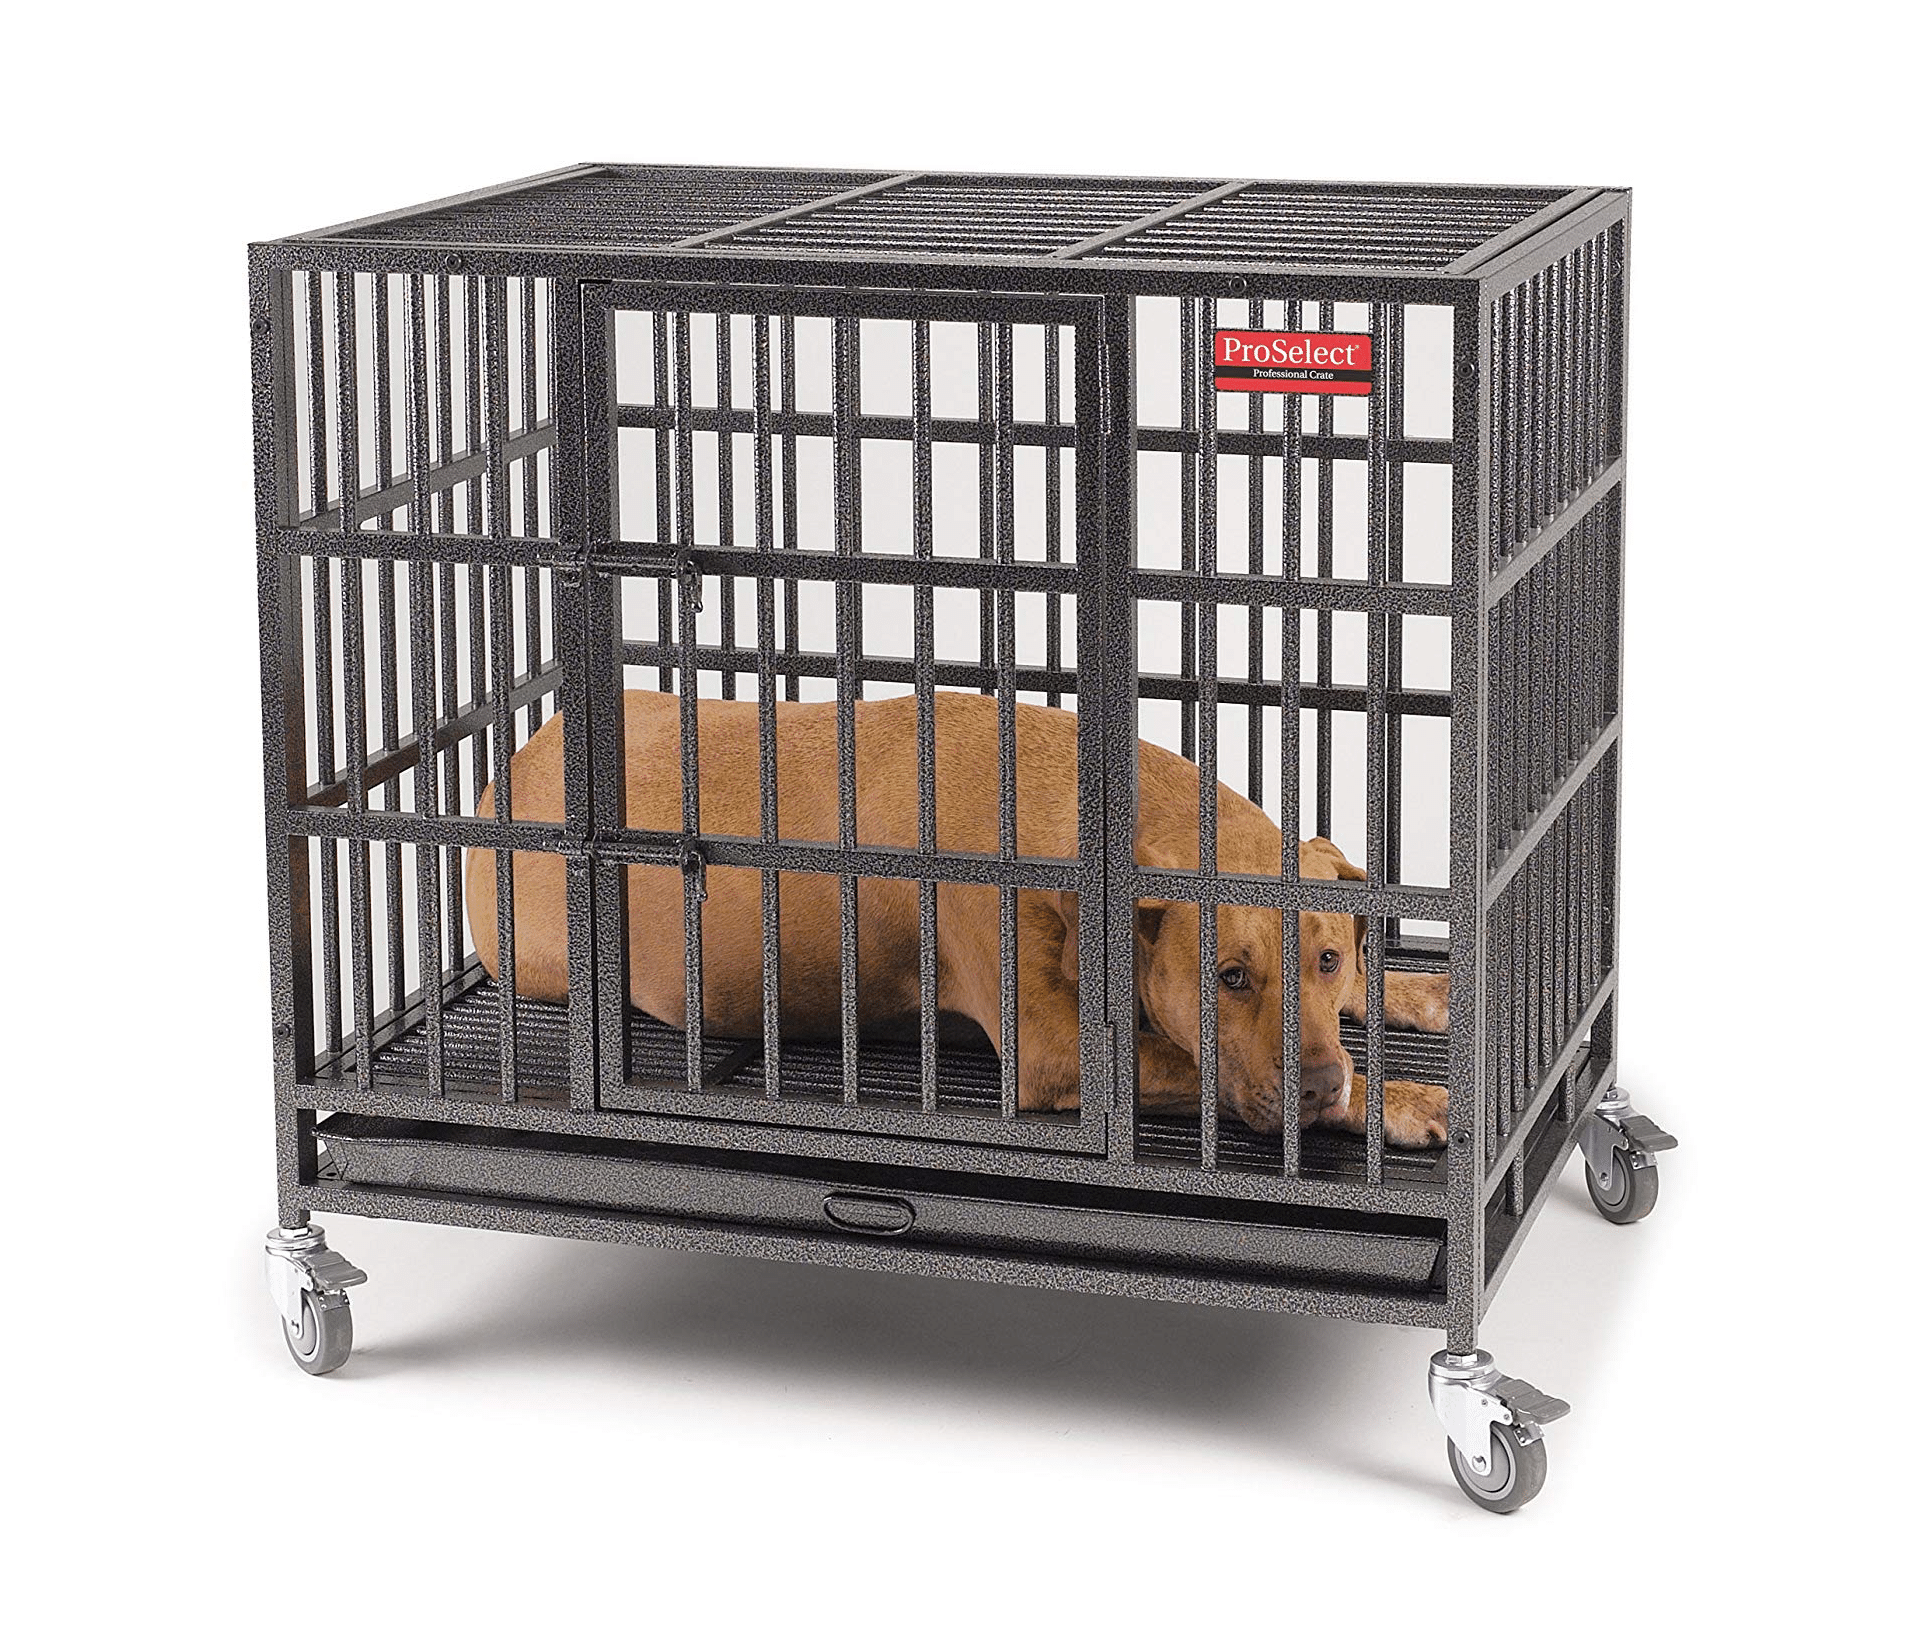 proselect empire dog crate reviews